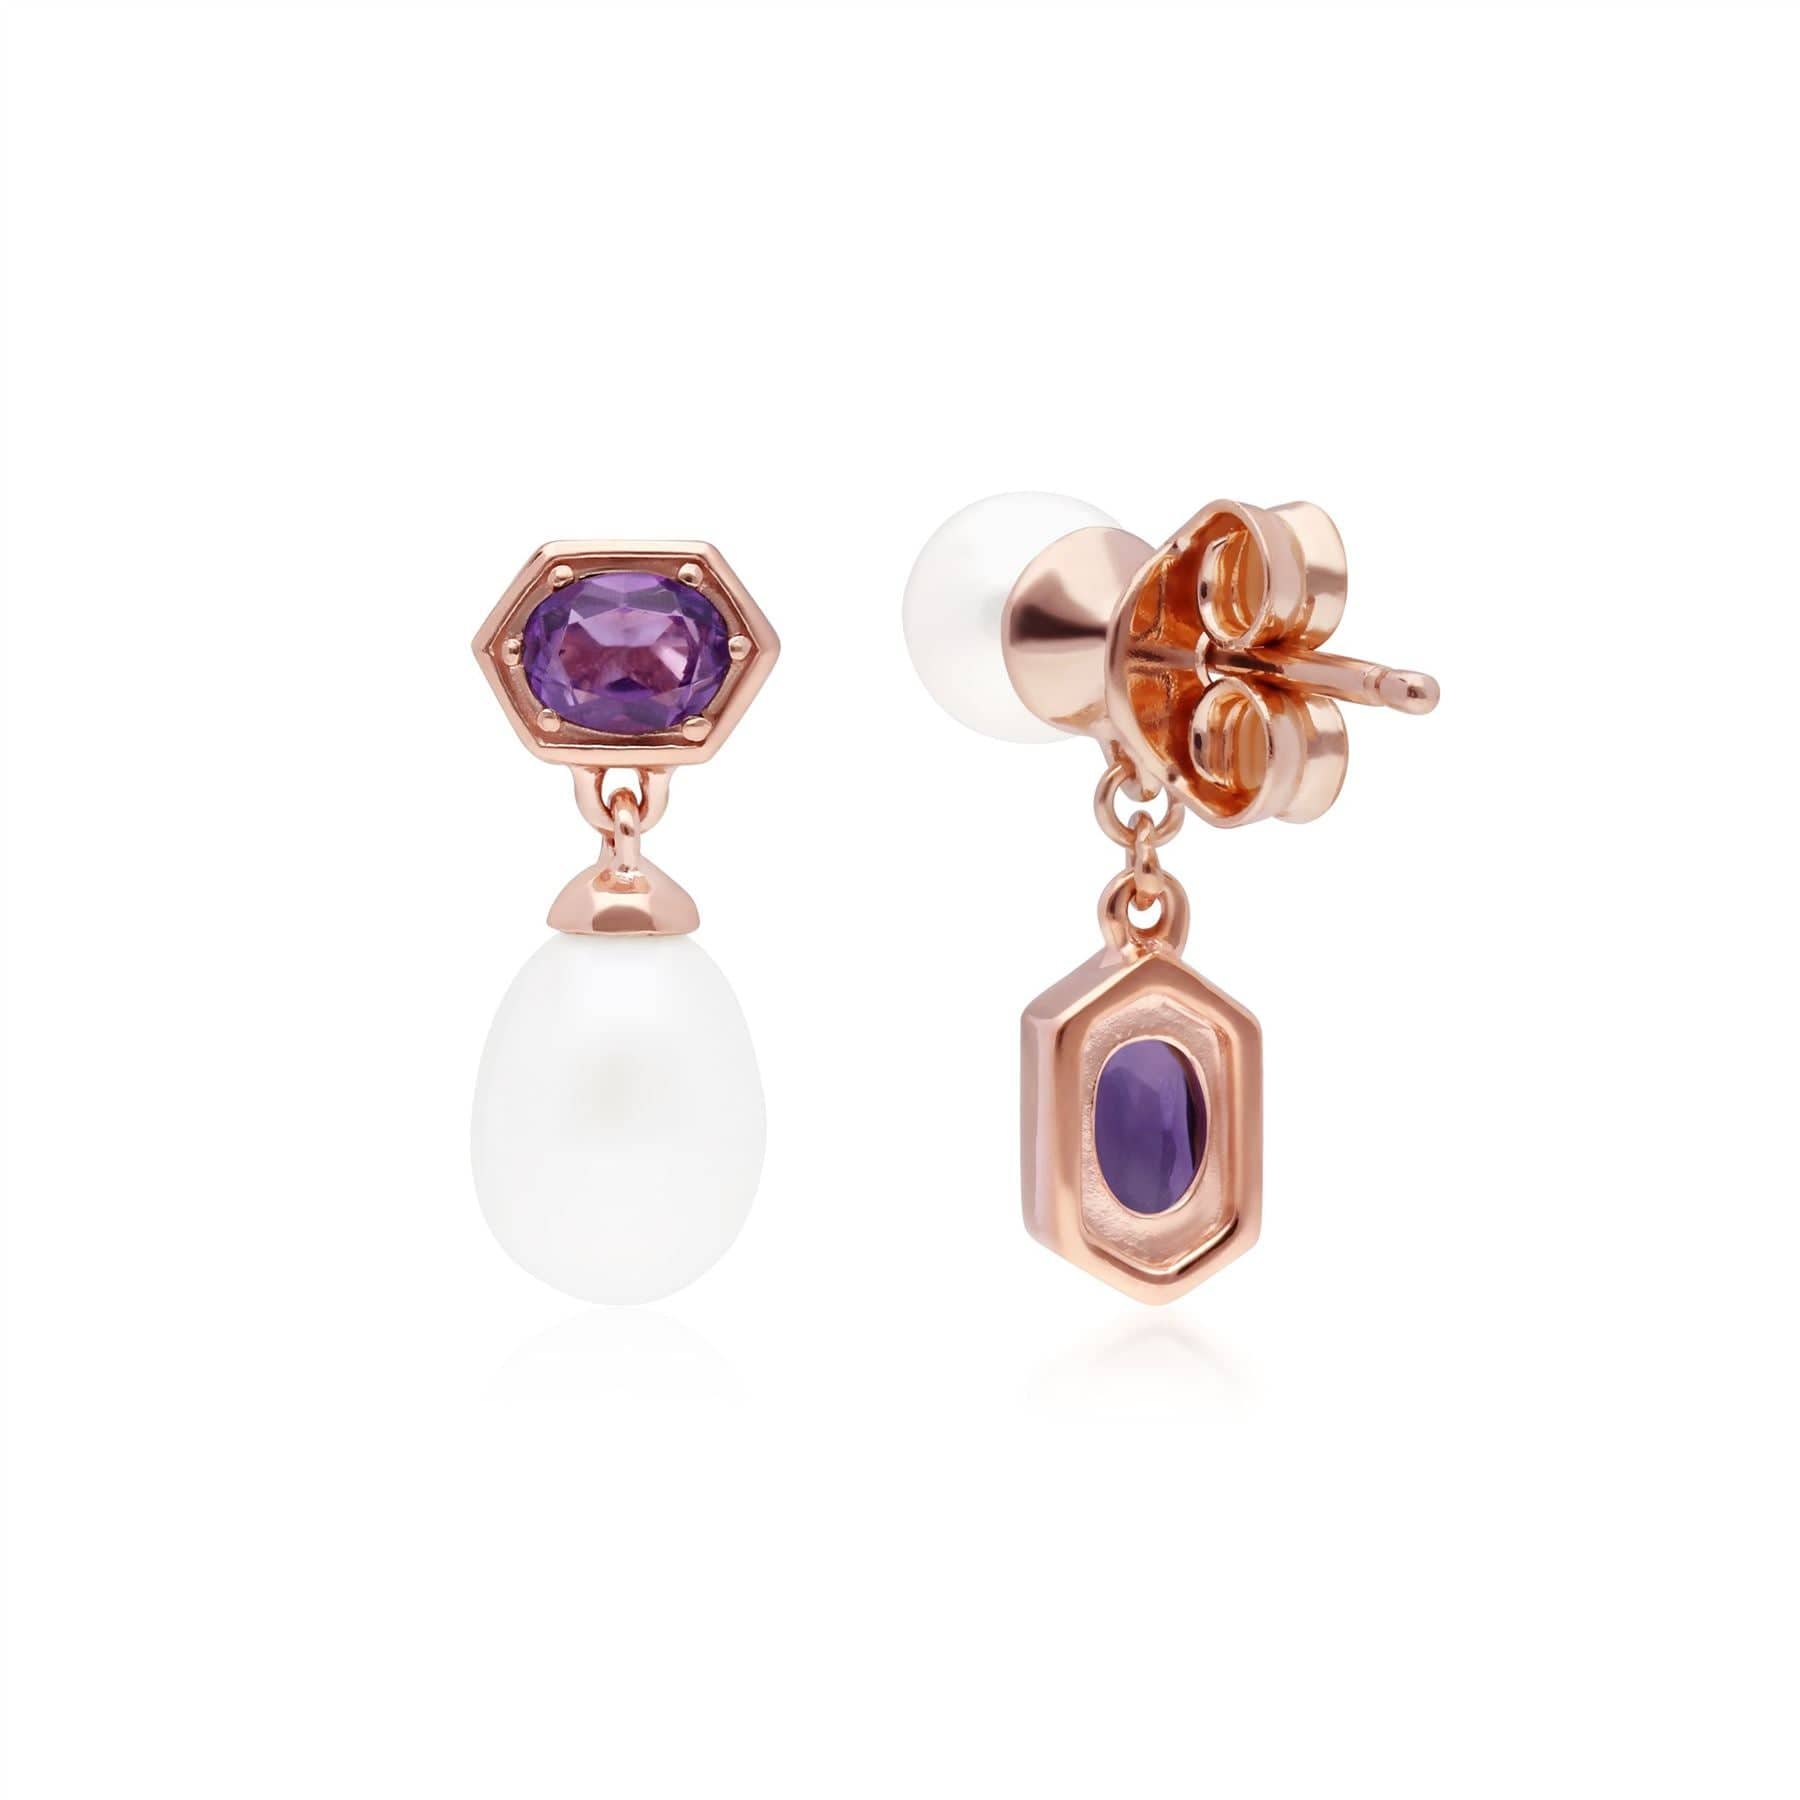 Modern Pearl & Amethyst Mismatched Drop Earrings in Rose Gold Plated Sterling Silver